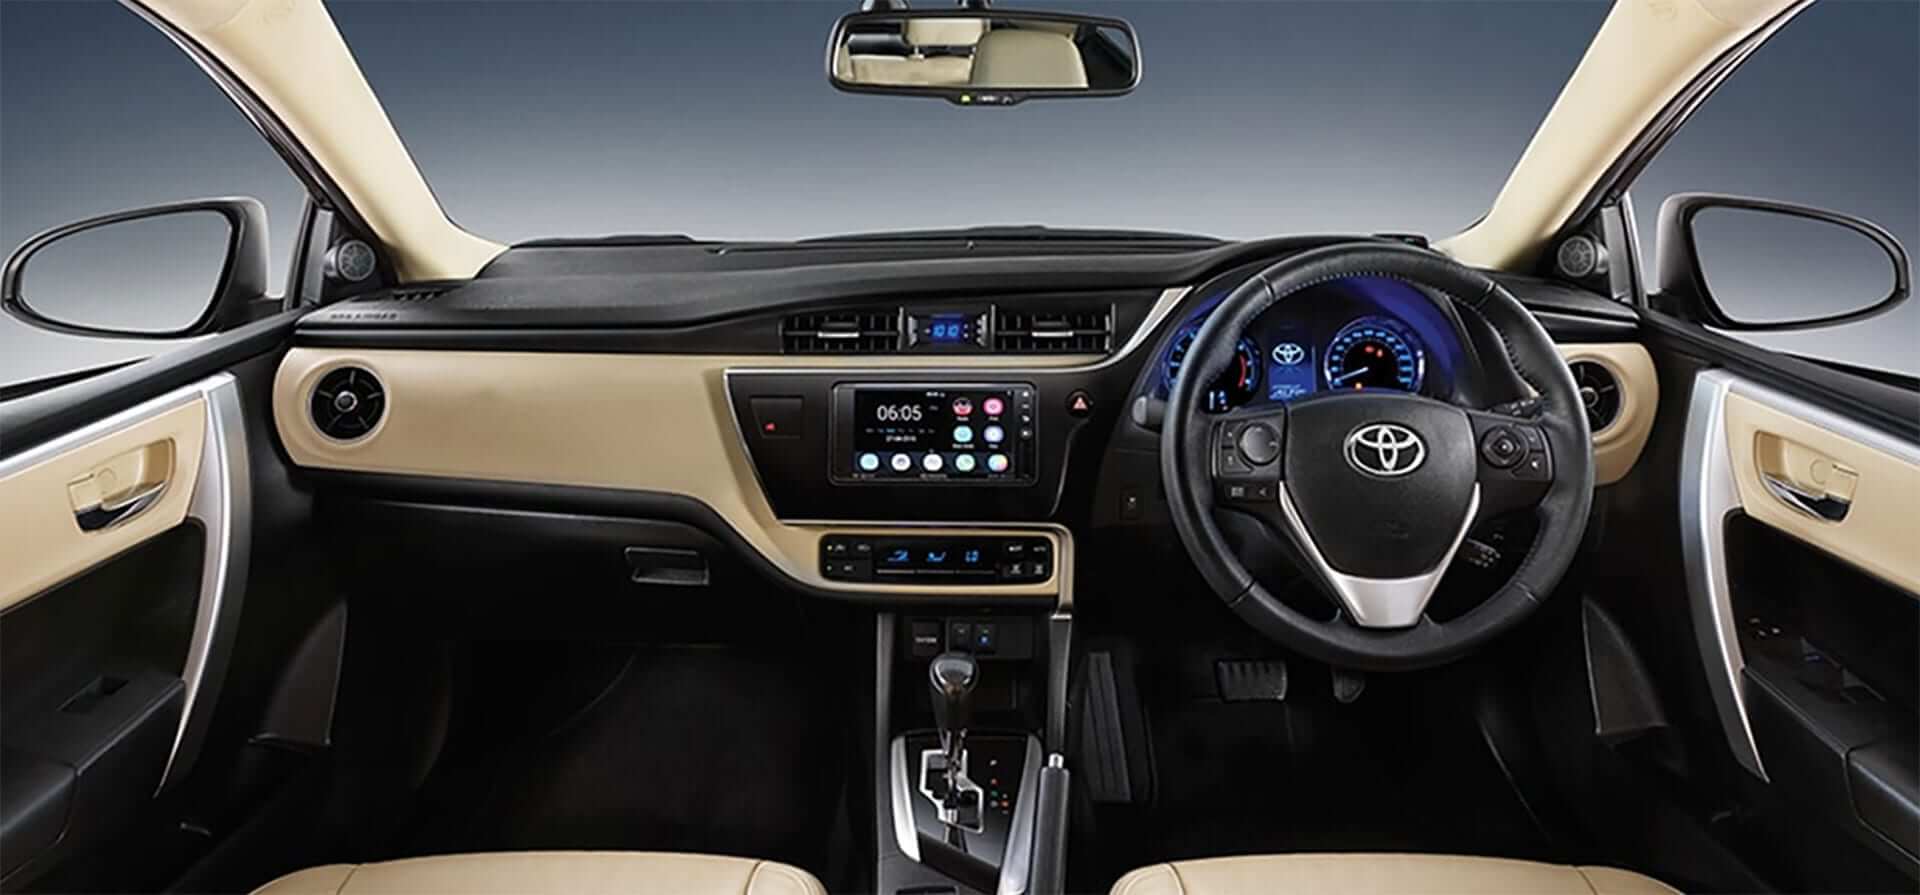 Toyota Altis 2018 Price in Pakistan Specification Features Colors Fuel ...